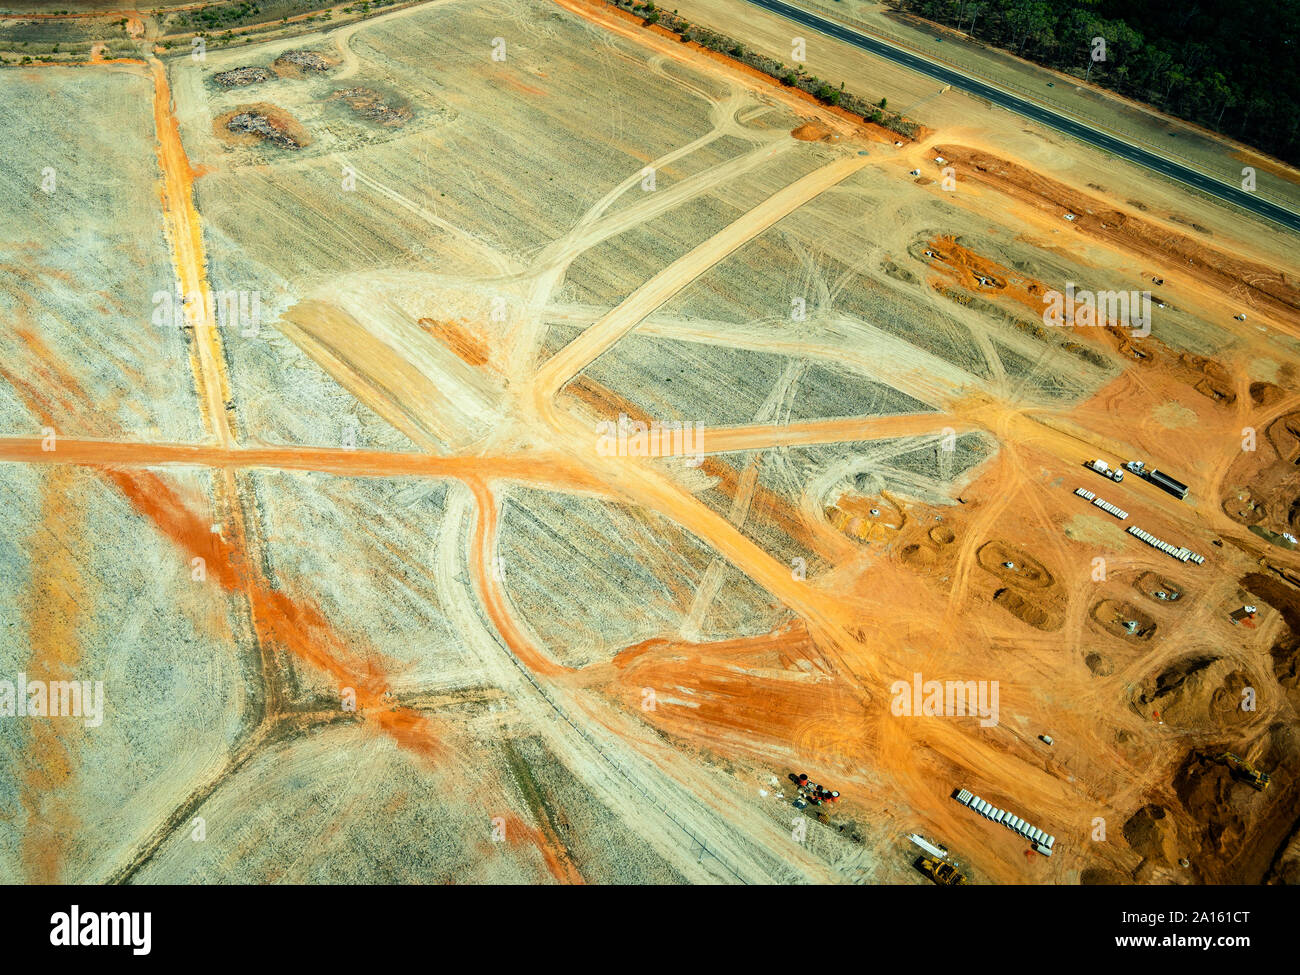 Aerial view of a quarry with trucks moving orange sand in Queensland, Australia Stock Photo